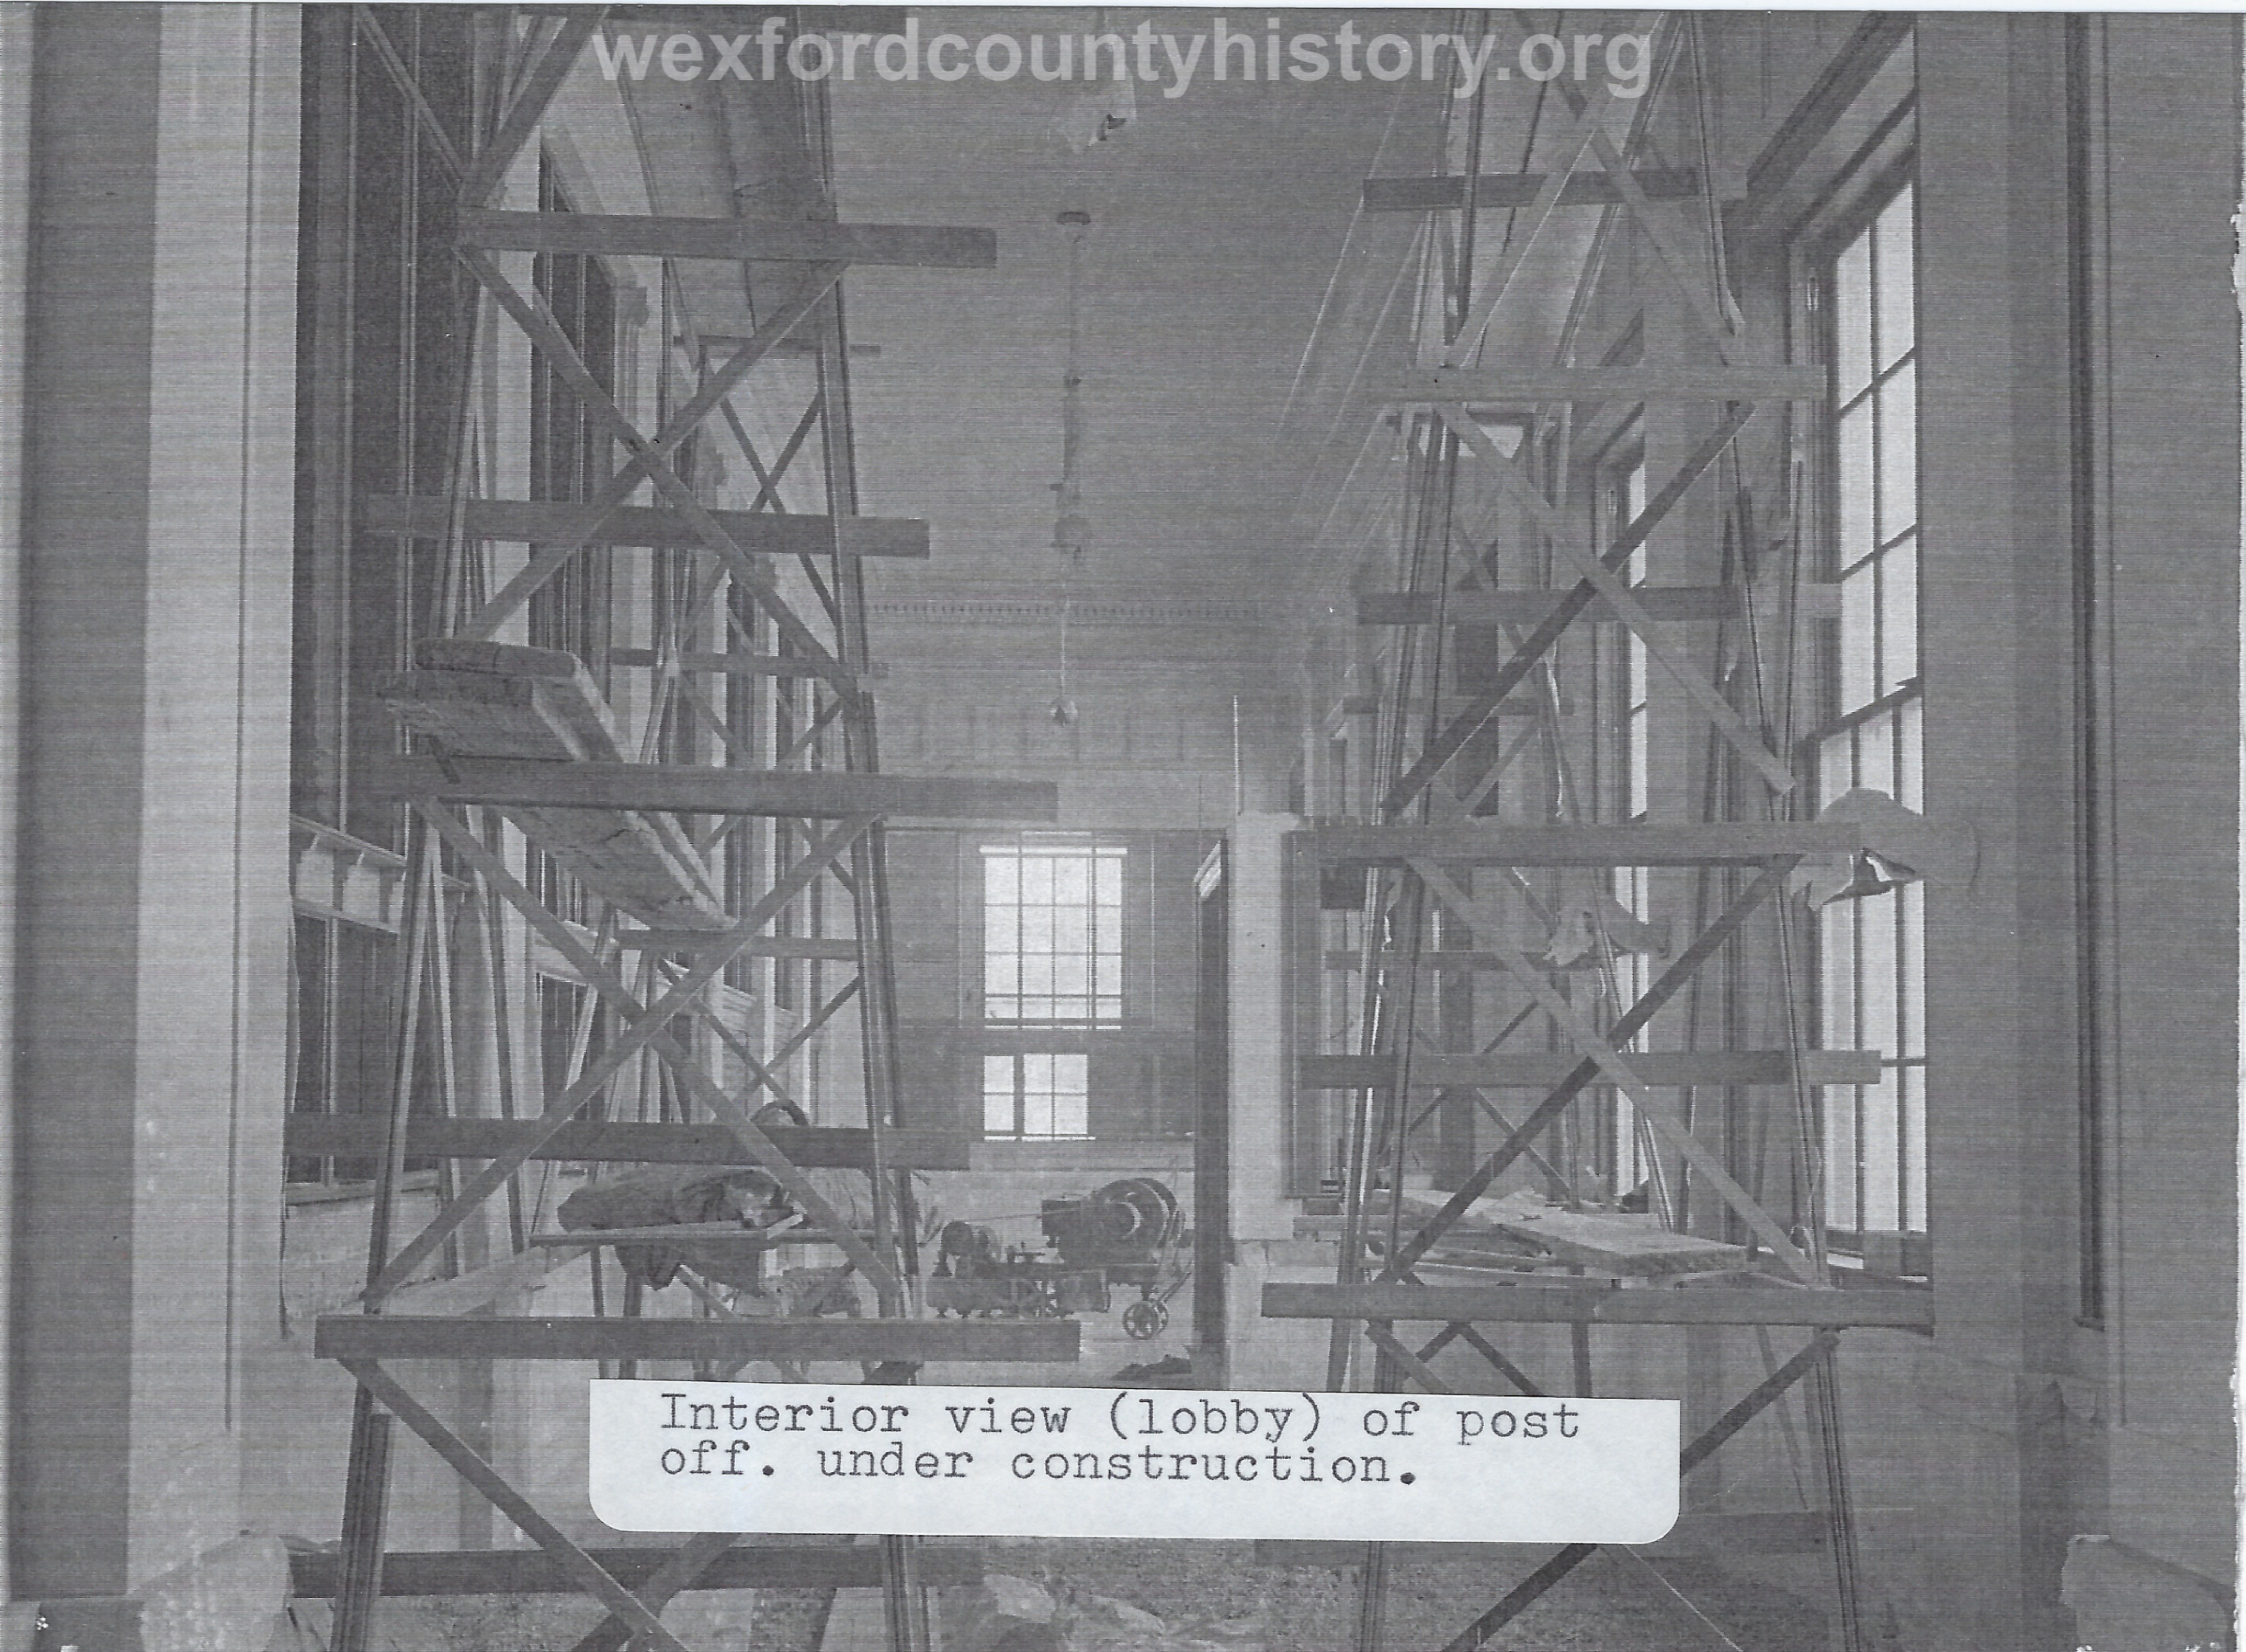 Cadillac Post Office Construction